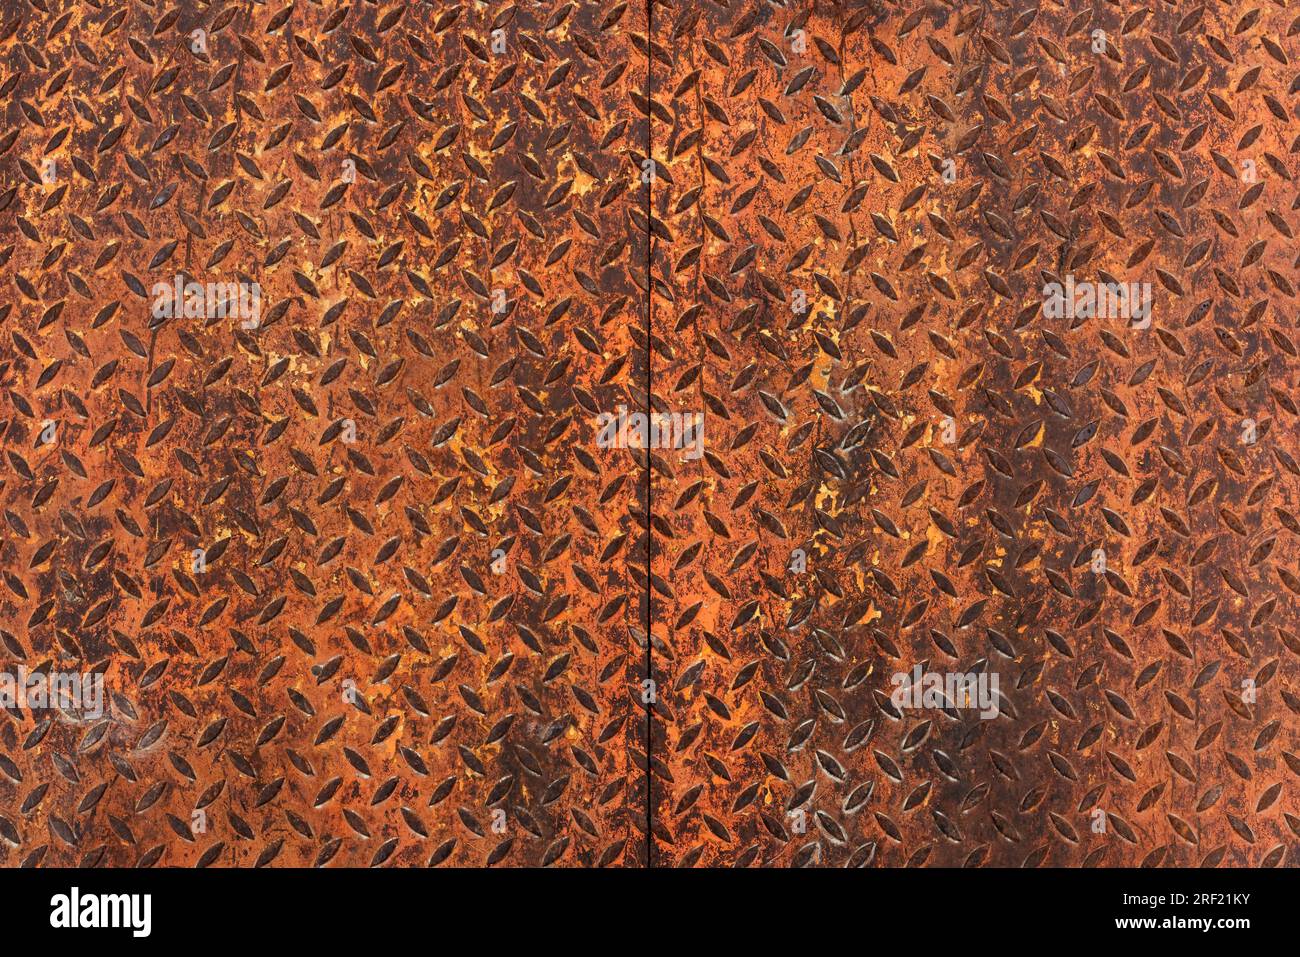 Top view of rusty anti-skid surface, industrial background and texture Stock Photo